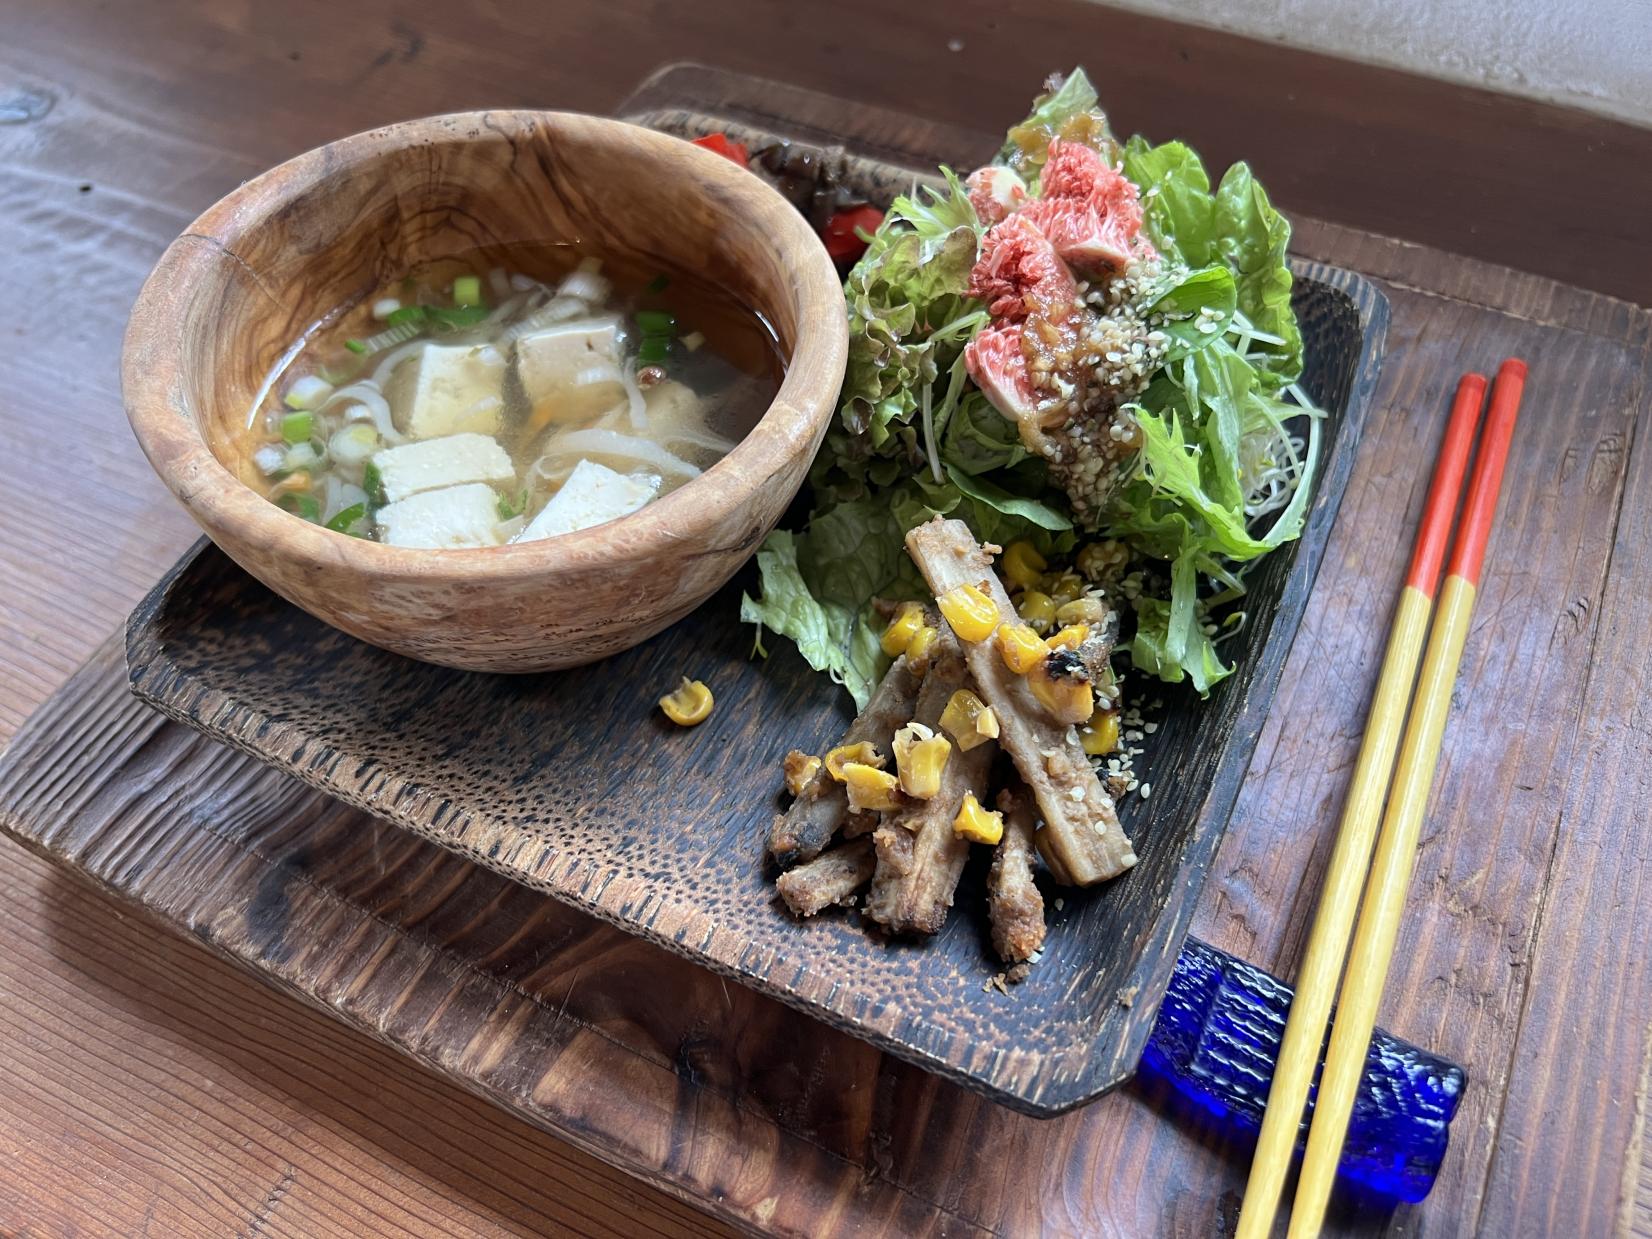 A plant-based cafe and restaurant that uses ingredients from Miyazaki-2